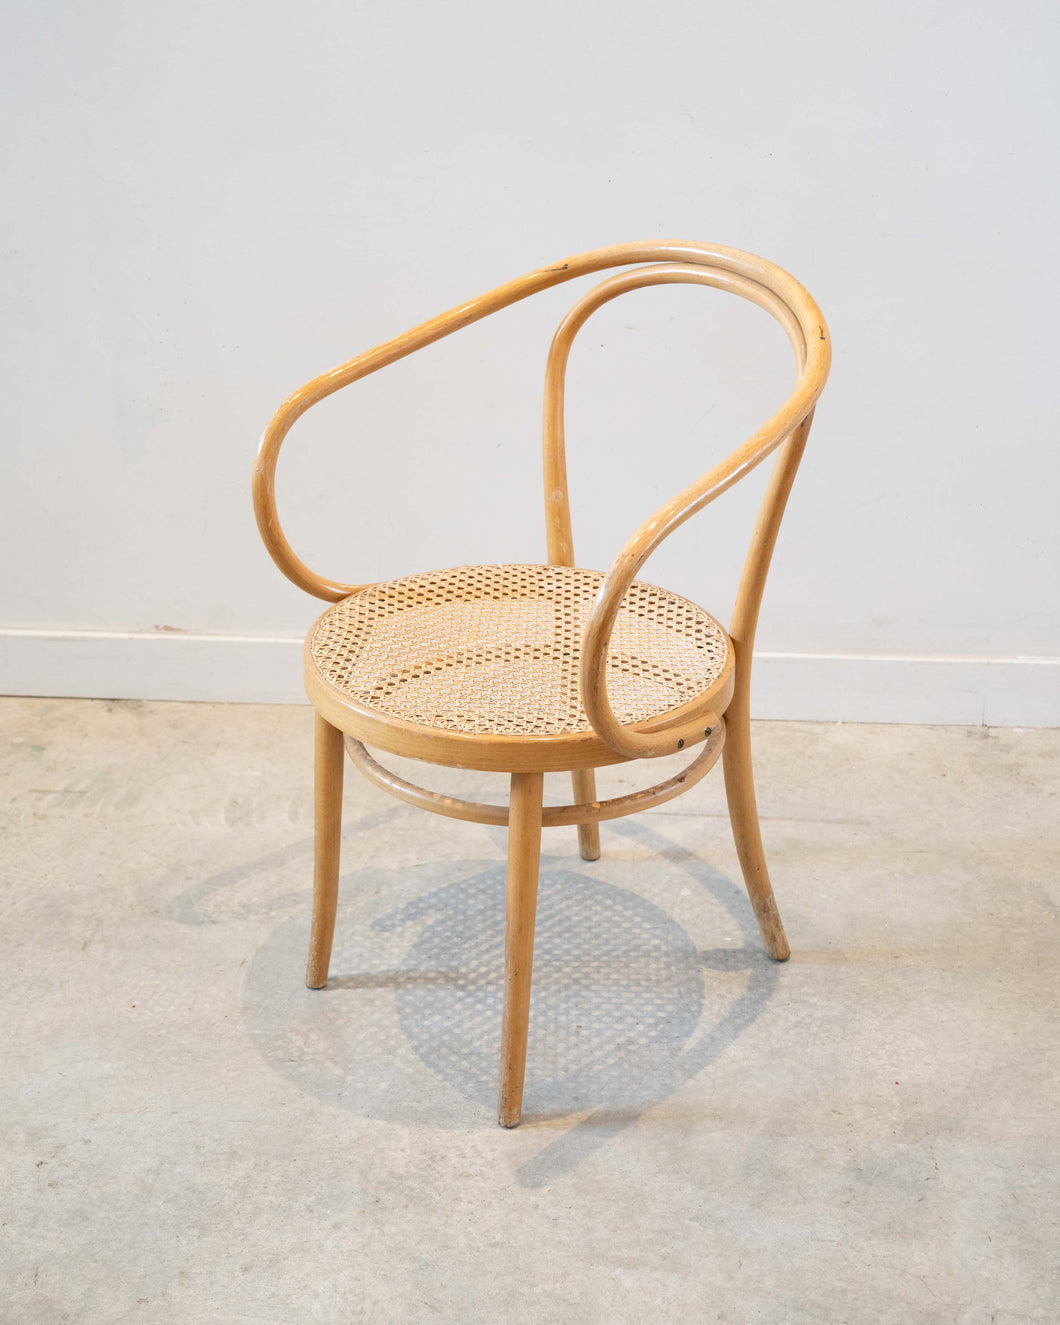 4 THONET BENTWOOD CHAIRS WITH ARM